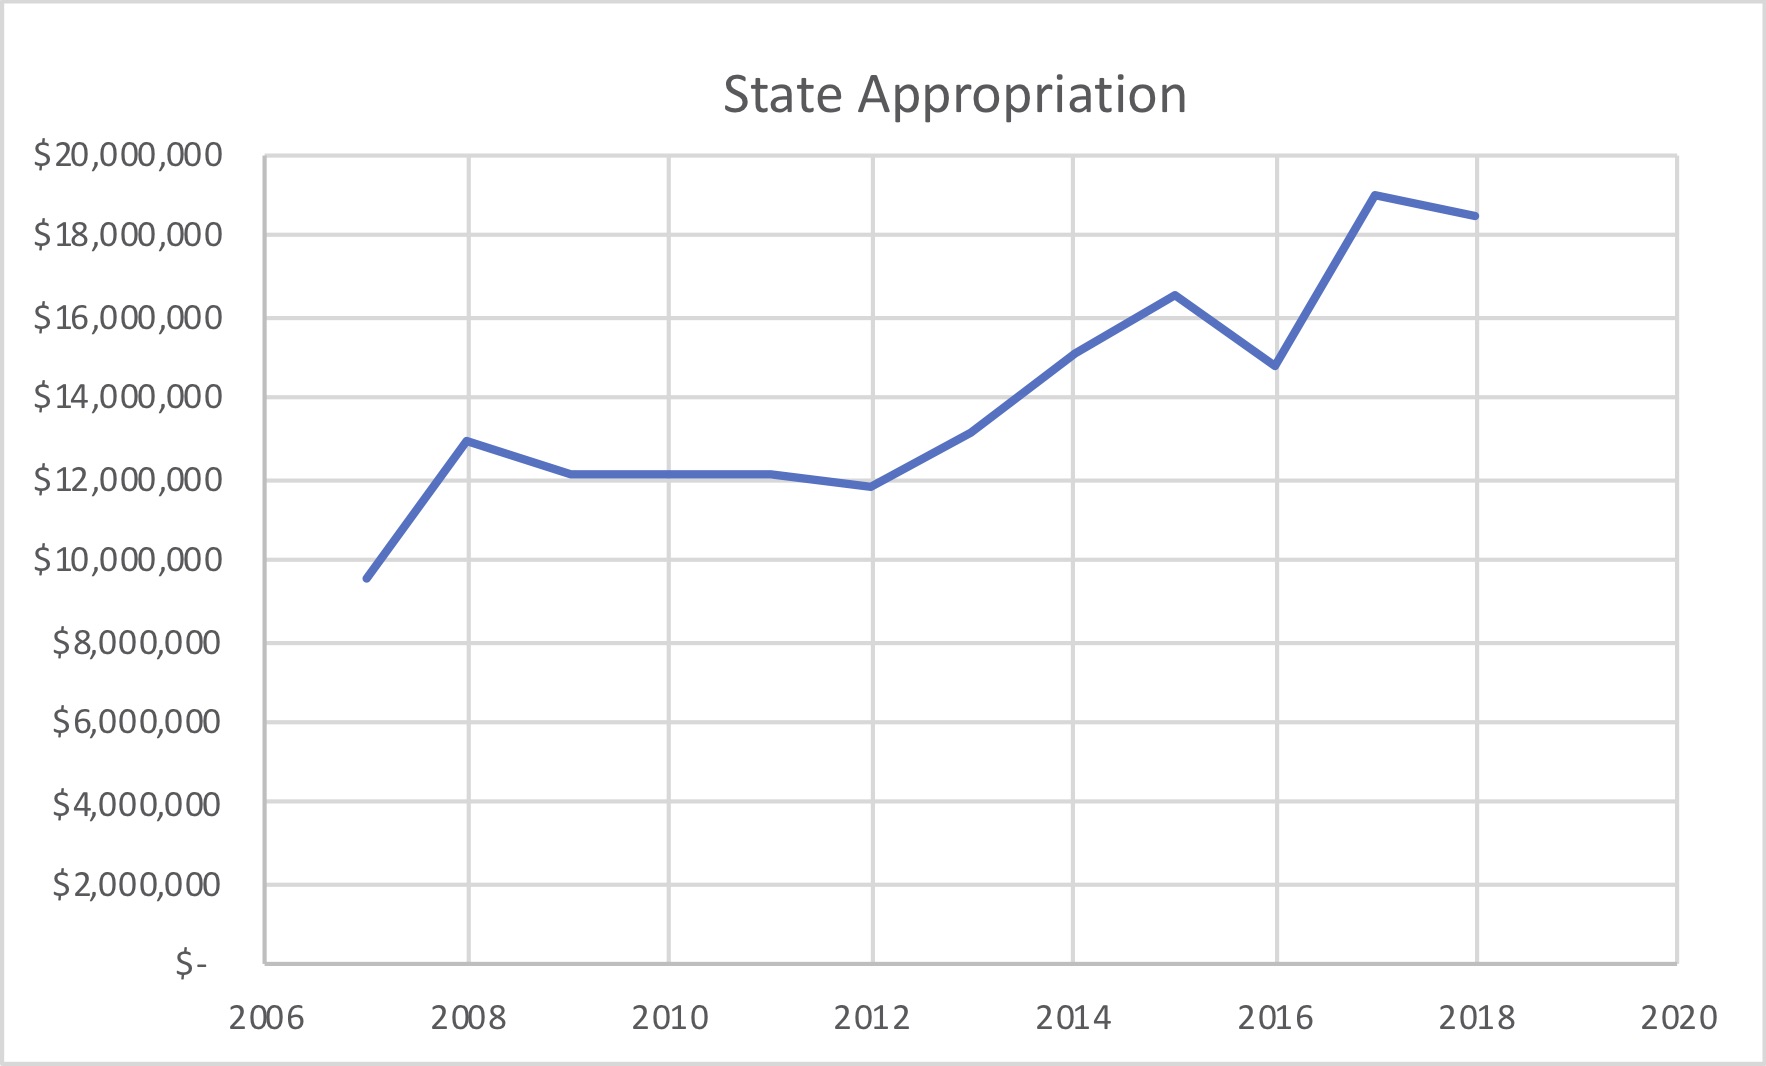 WCC's state appropriation 2008-2018